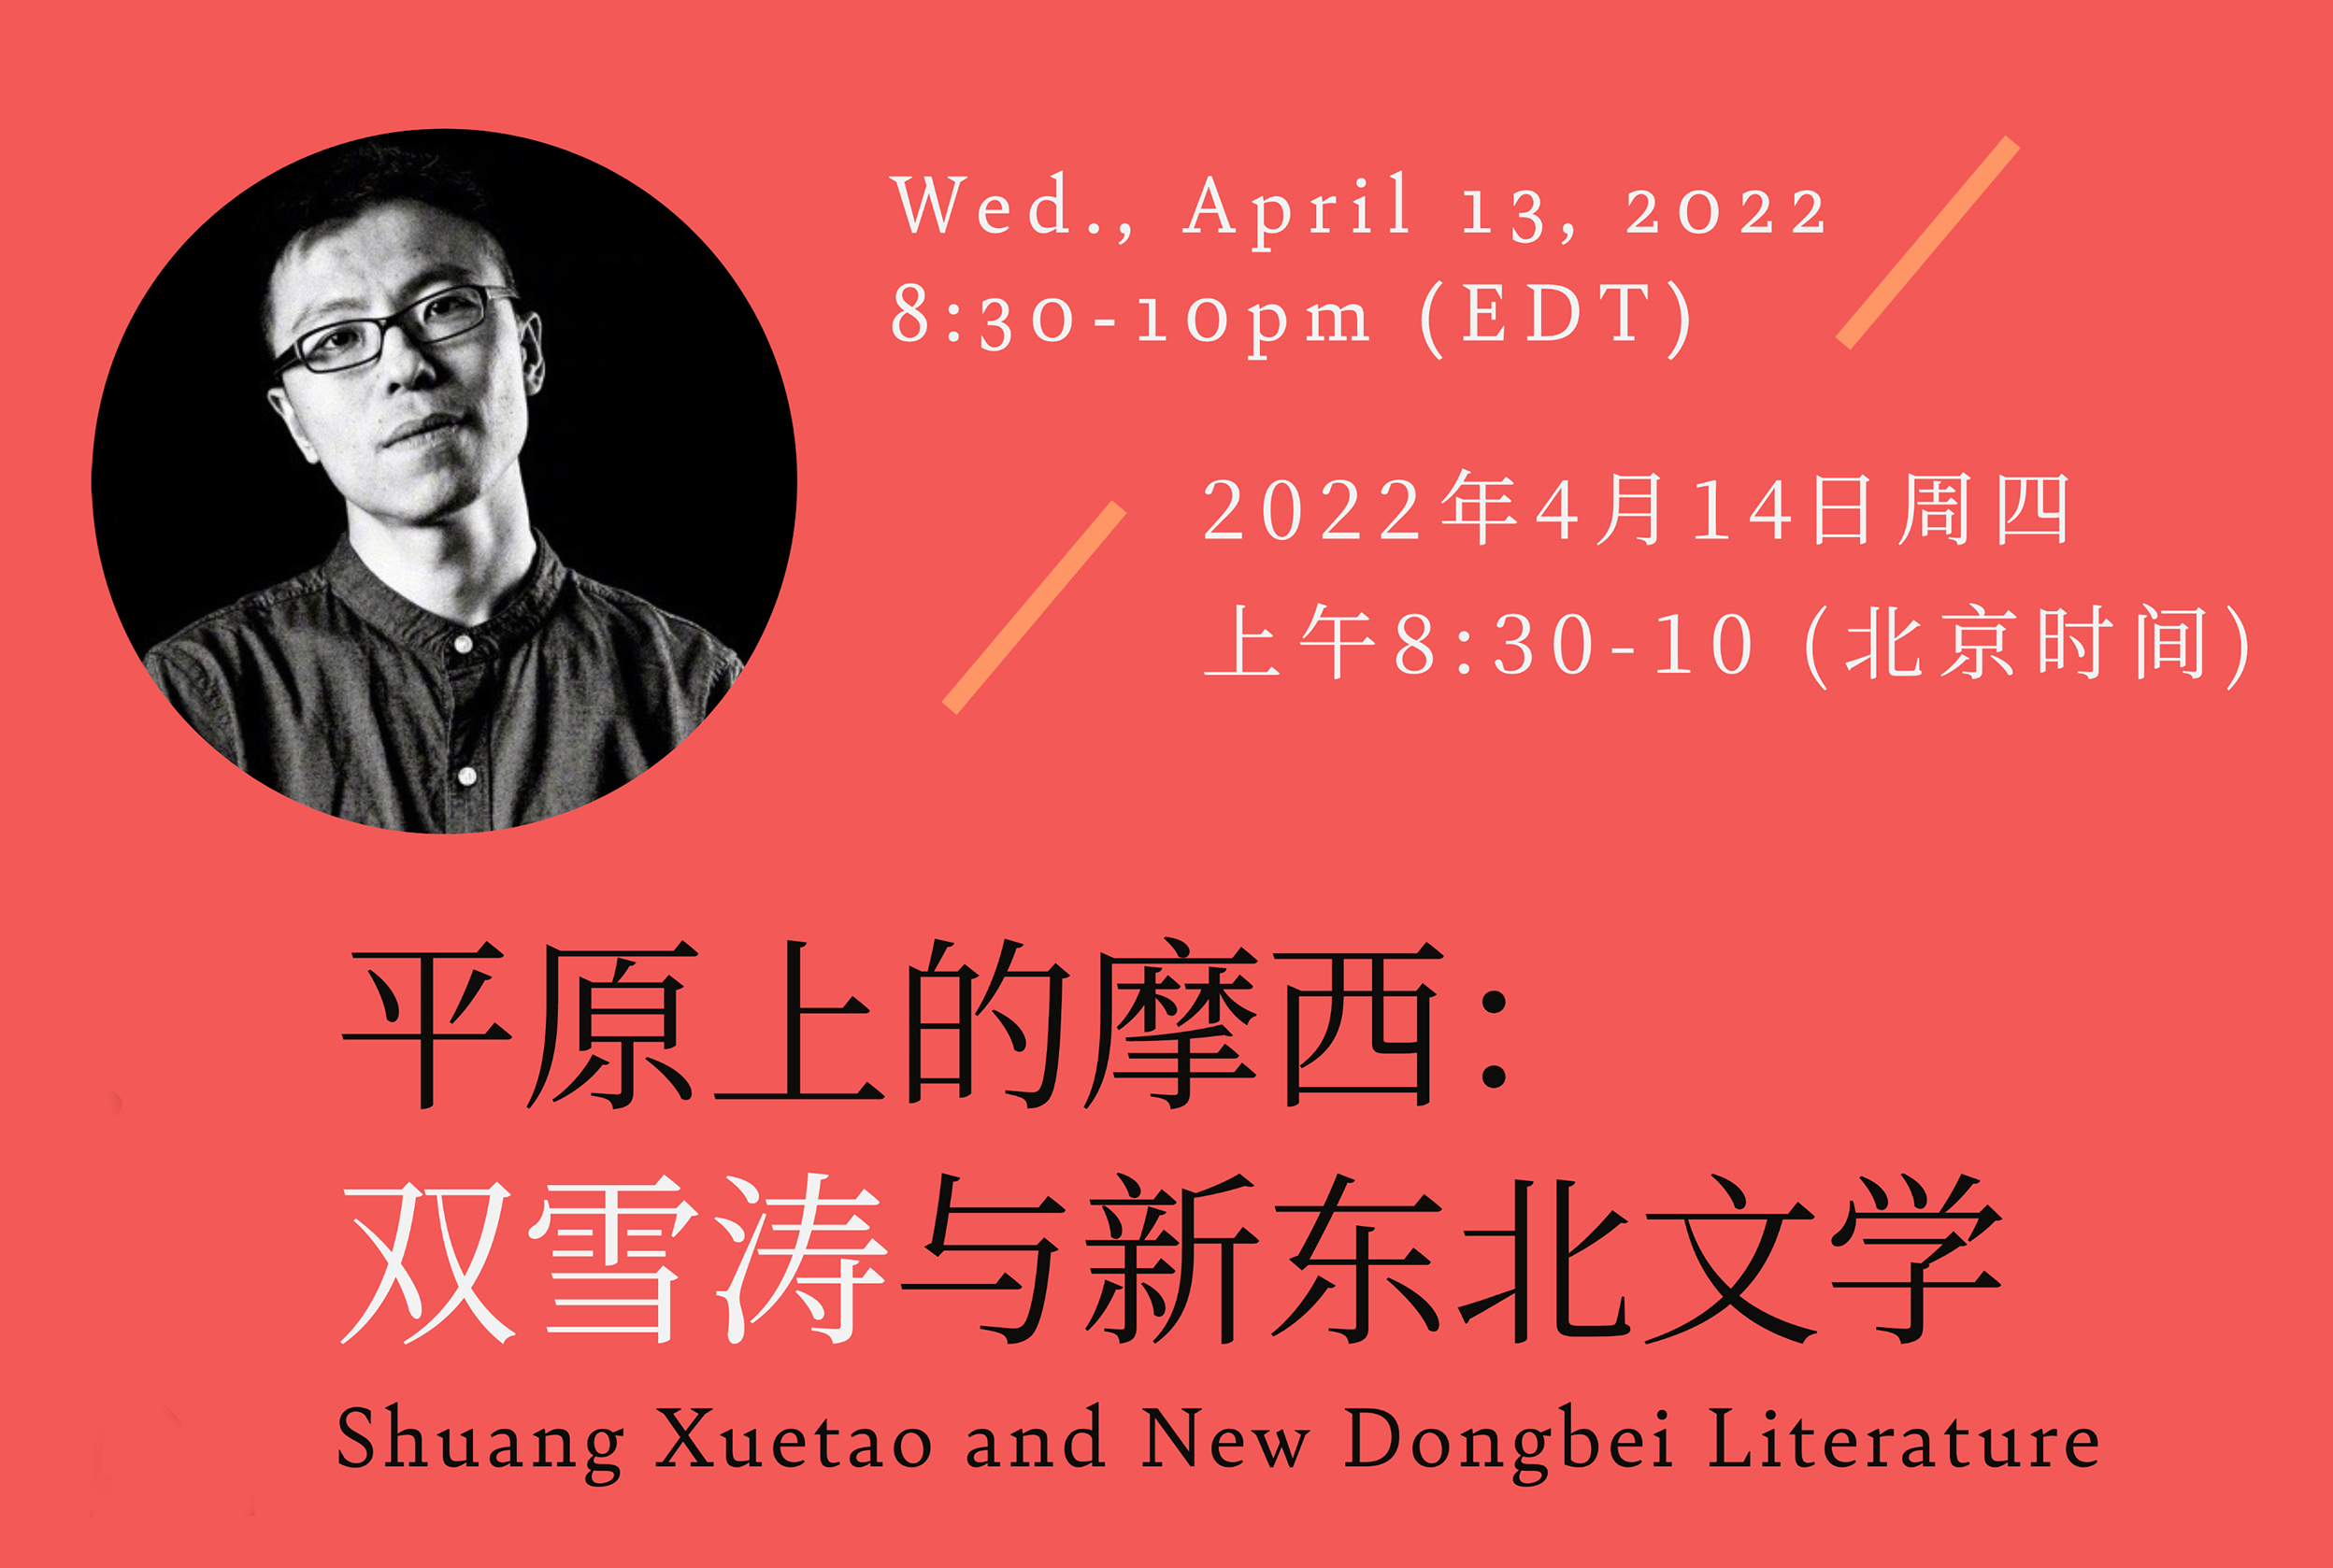 Moses on the Plain: Shuang Xuetao and New Dongbei Literature